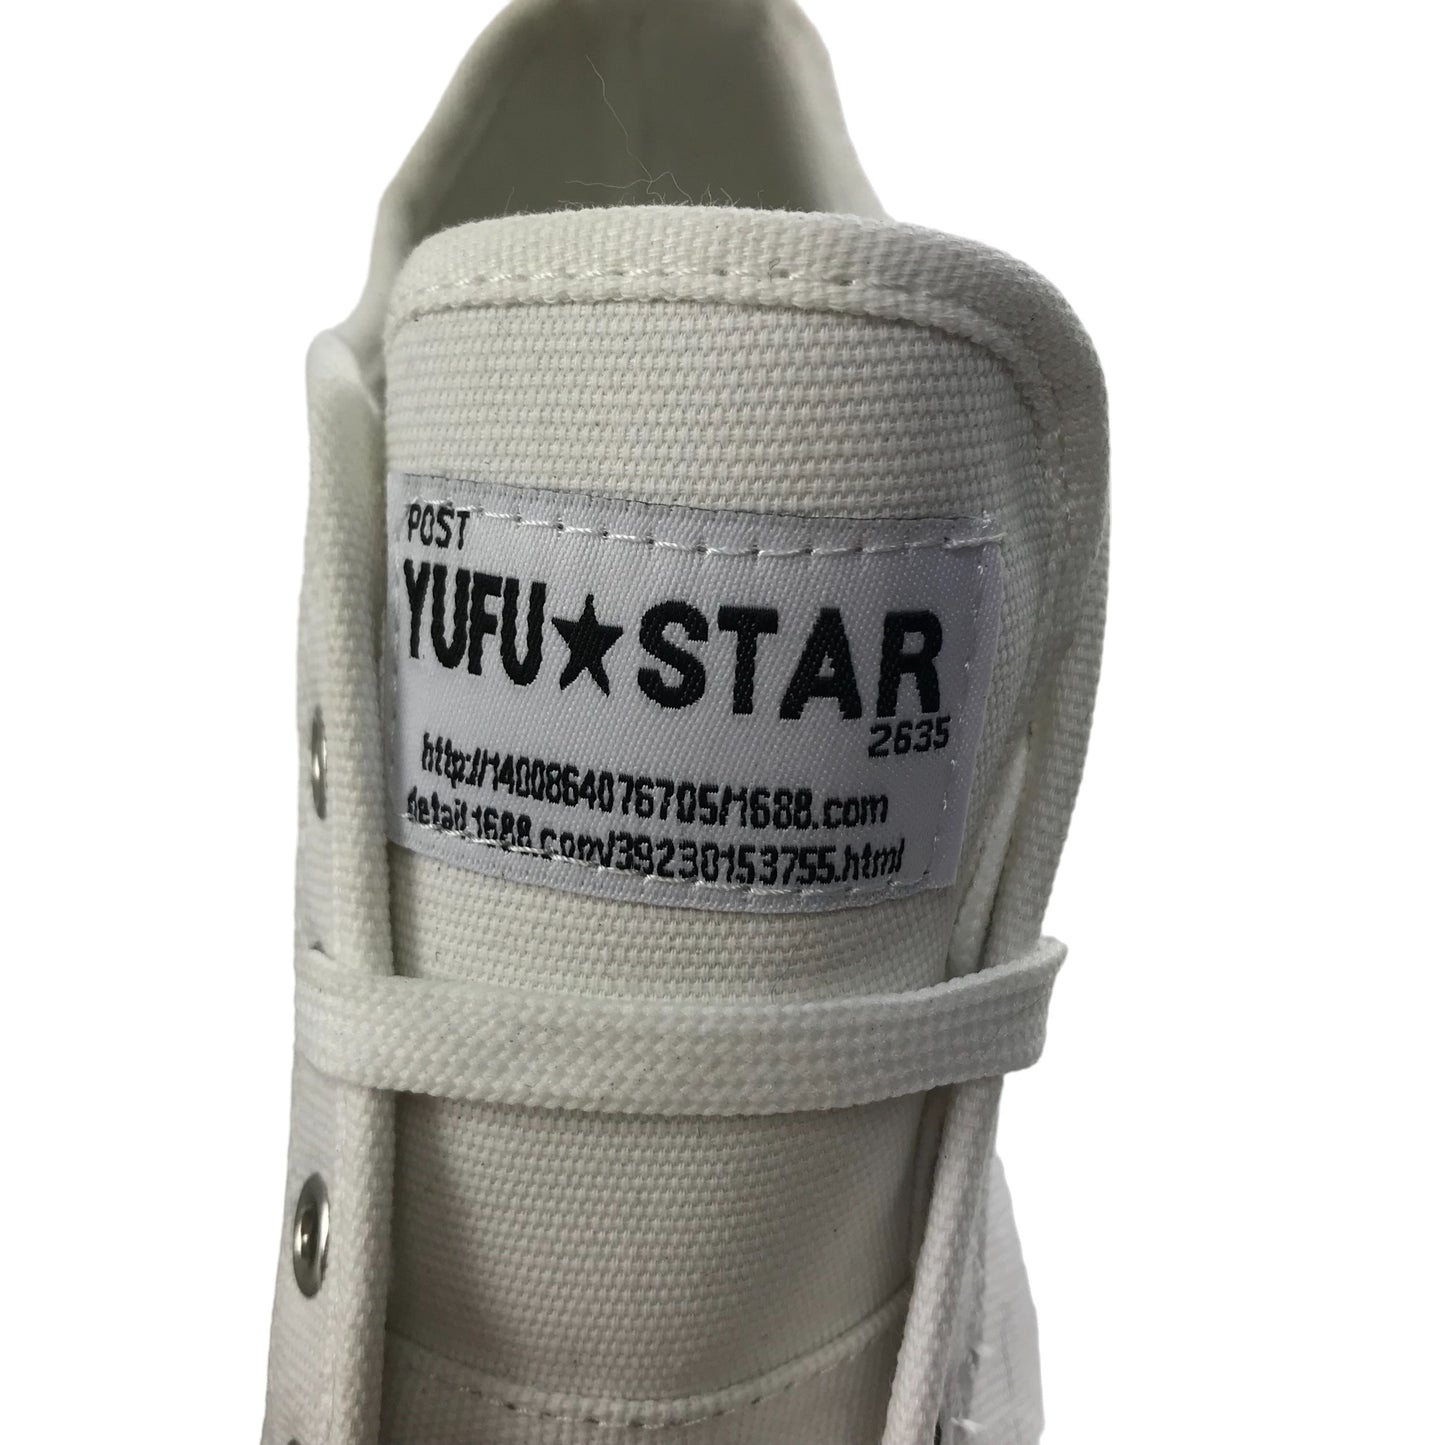 Yufu Star Wedge Trainers Shoe Size 5 White Sneakers with Block Heel and Laces